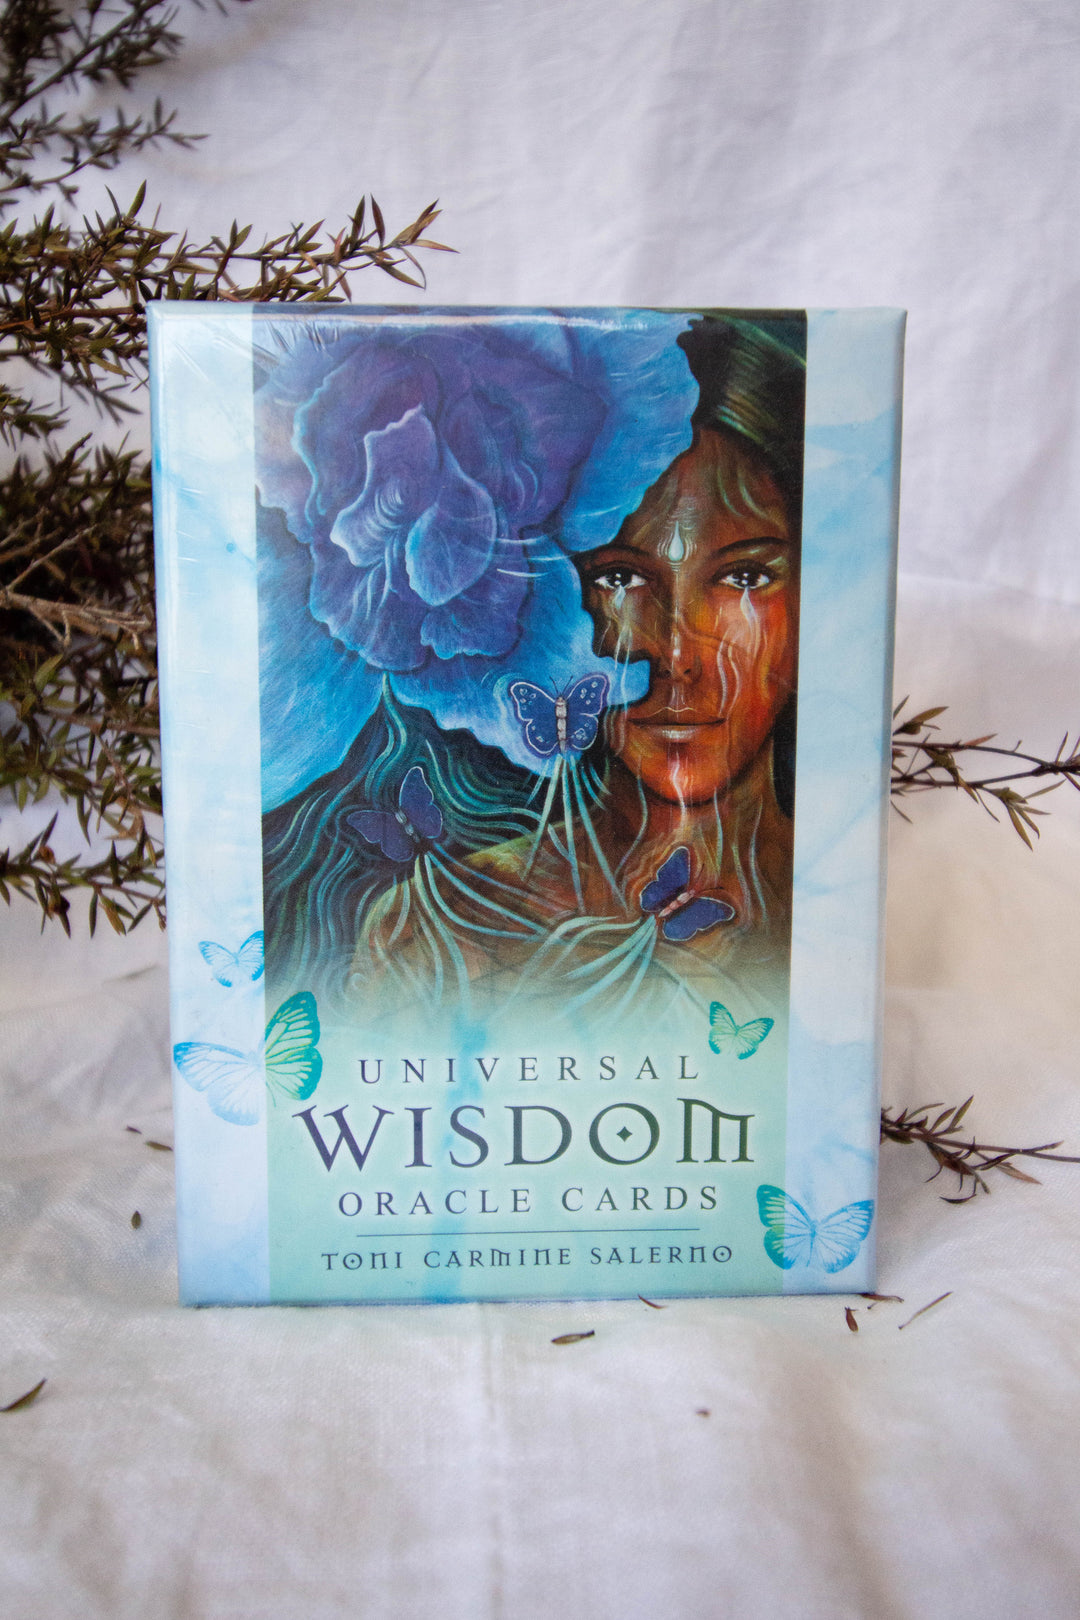 Wisdom Oracle Cards